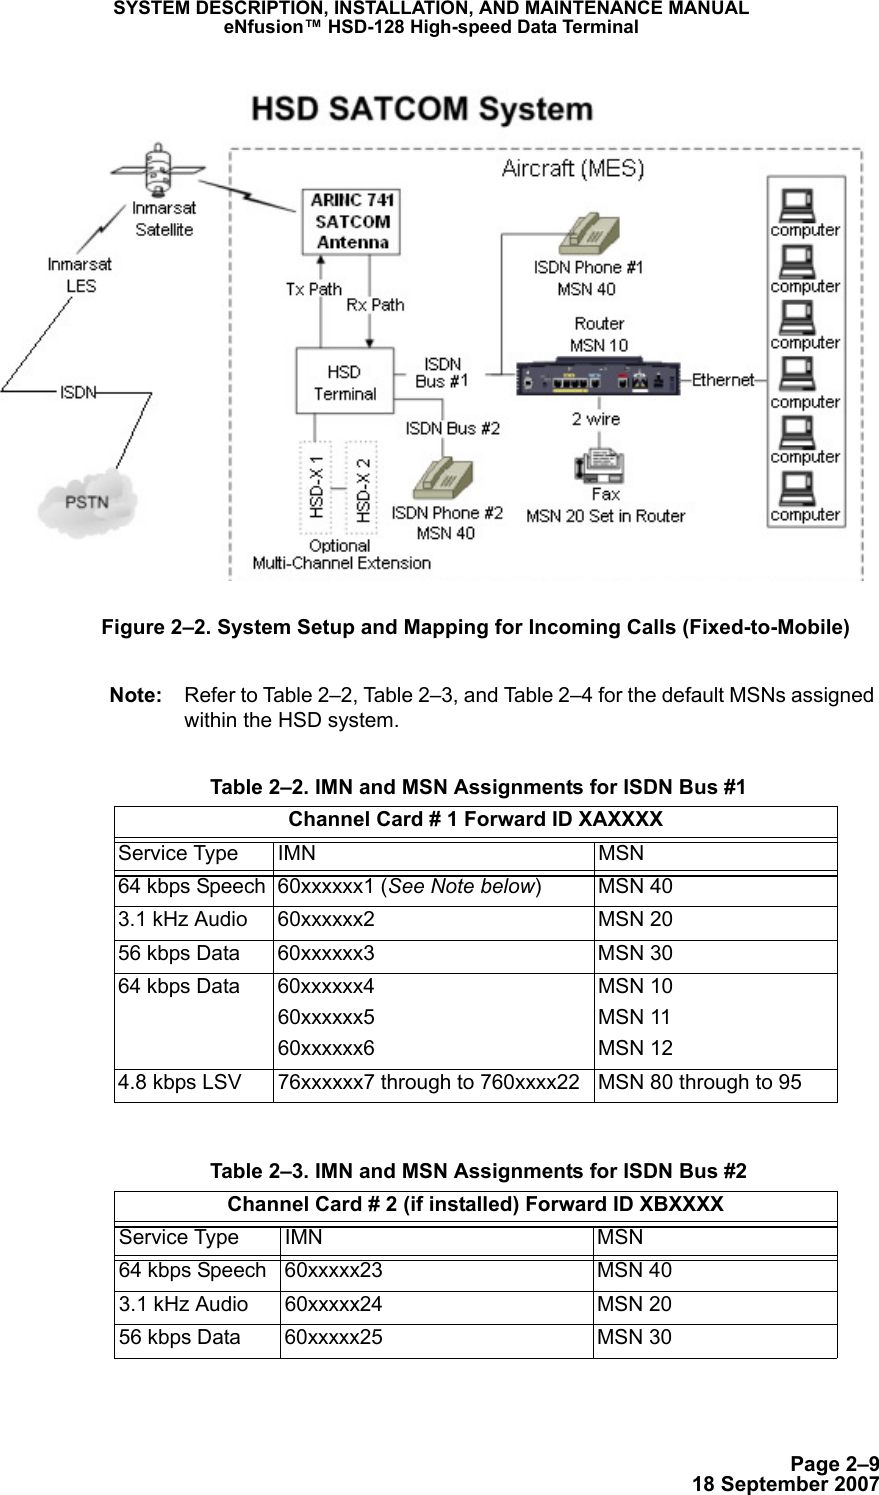 Page 2–918 September 2007SYSTEM DESCRIPTION, INSTALLATION, AND MAINTENANCE MANUALeNfusion™ HSD-128 High-speed Data TerminalFigure 2–2. System Setup and Mapping for Incoming Calls (Fixed-to-Mobile)Note: Refer to Table 2–2, Table 2–3, and Table 2–4 for the default MSNs assigned within the HSD system. Table 2–2. IMN and MSN Assignments for ISDN Bus #1Channel Card # 1 Forward ID XAXXXXService Type IMN MSN64 kbps Speech 60xxxxxx1 (See Note below)MSN 403.1 kHz Audio 60xxxxxx2 MSN 2056 kbps Data 60xxxxxx3   MSN 3064 kbps Data 60xxxxxx460xxxxxx560xxxxxx6MSN 10MSN 11MSN 124.8 kbps LSV  76xxxxxx7 through to 760xxxx22 MSN 80 through to 95 Table 2–3. IMN and MSN Assignments for ISDN Bus #2Channel Card # 2 (if installed) Forward ID XBXXXXService Type  IMN  MSN64 kbps Speech 60xxxxx23 MSN 403.1 kHz Audio 60xxxxx24 MSN 2056 kbps Data 60xxxxx25   MSN 30